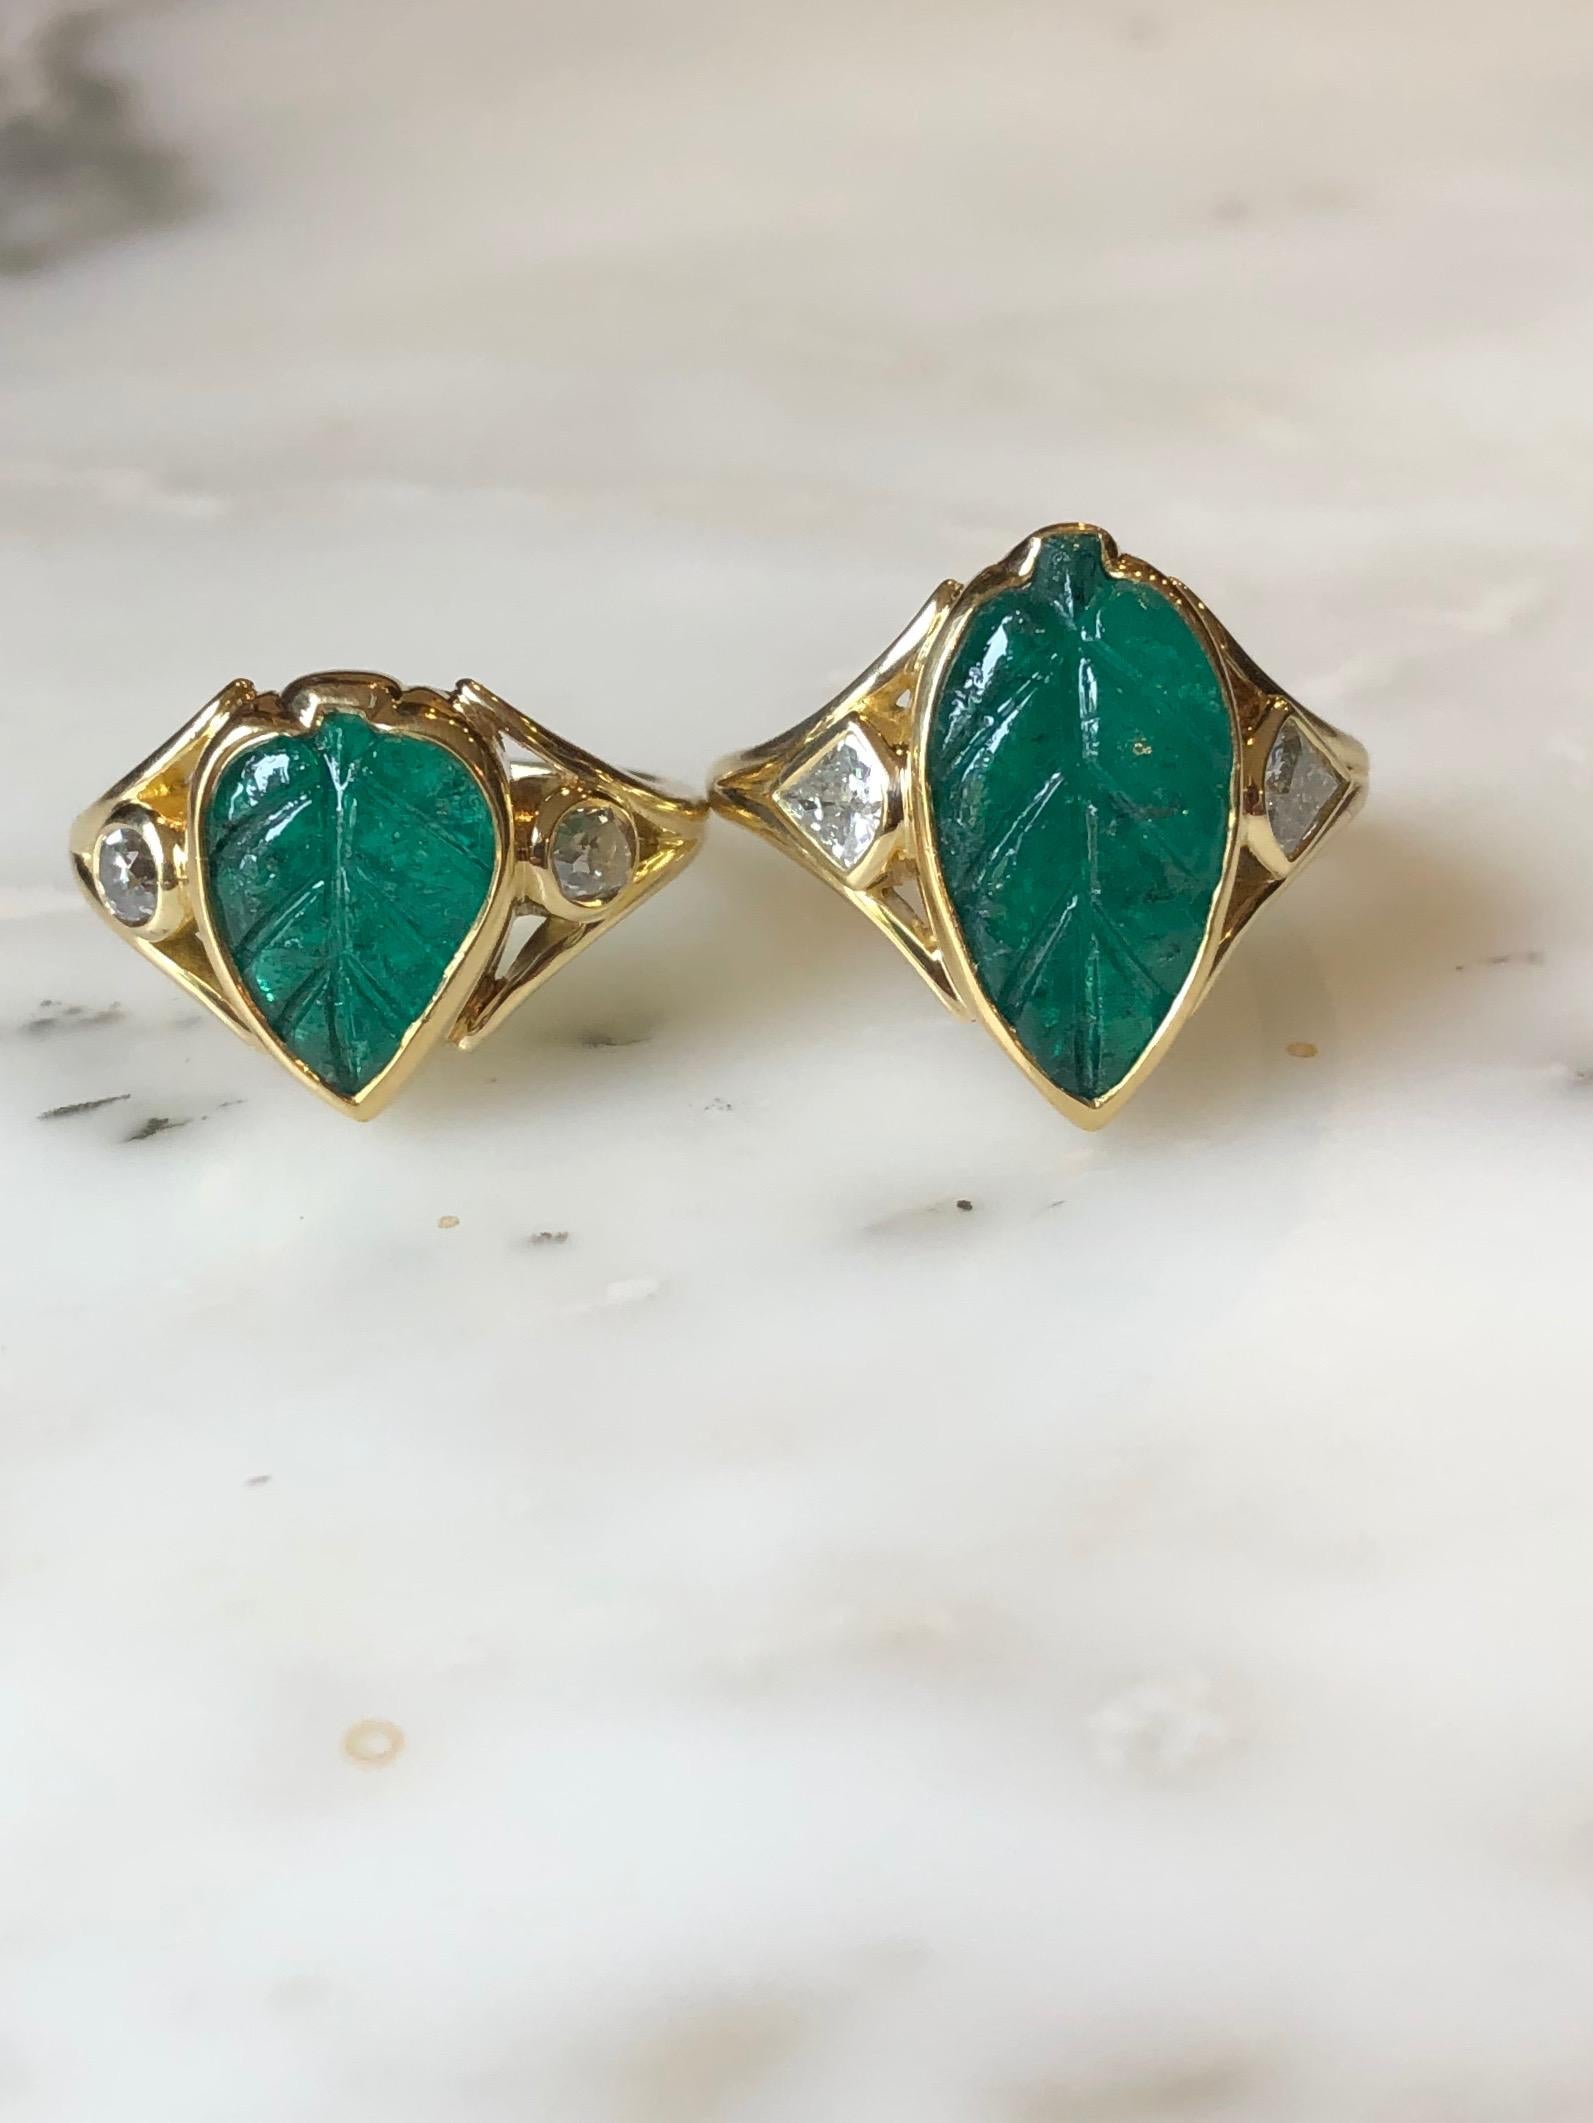 Hand carved Muzo Colombian emerald leaf ring with VS+ diamonds flanking. This emerald was sourced directly from Colombia through our collaboration with IEEX Emeralds. This ring is made by hand using ancient gold-smithing techniques in California by